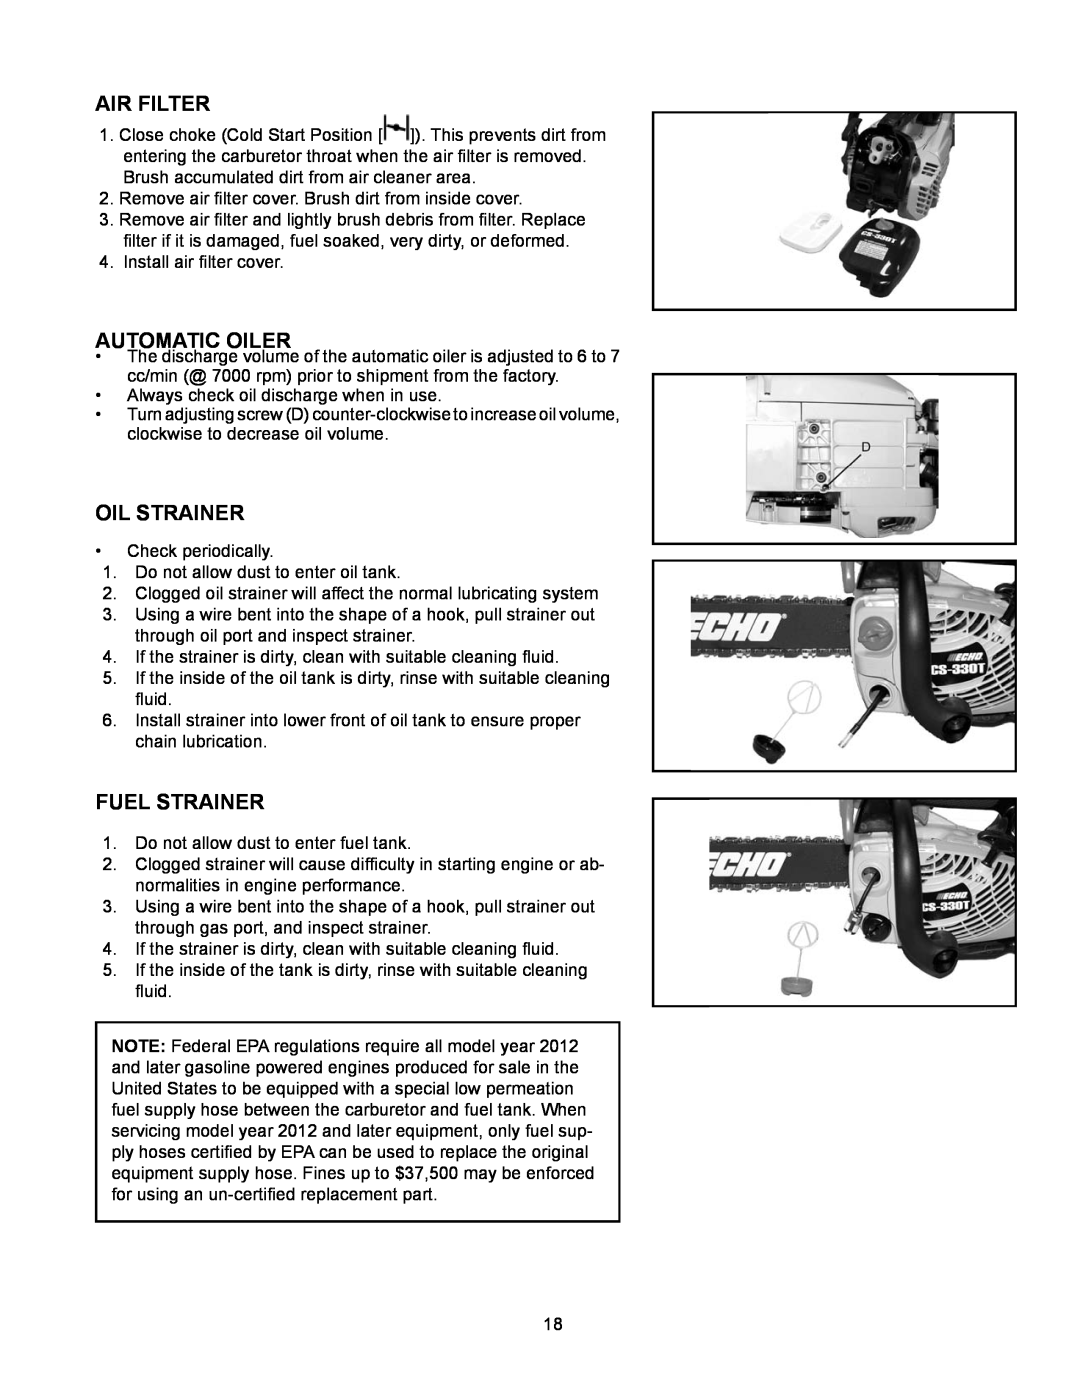 Echo CS-330T, CS-360T instruction manual air filter, automatic oiler, oil strainer, fuel strainer 